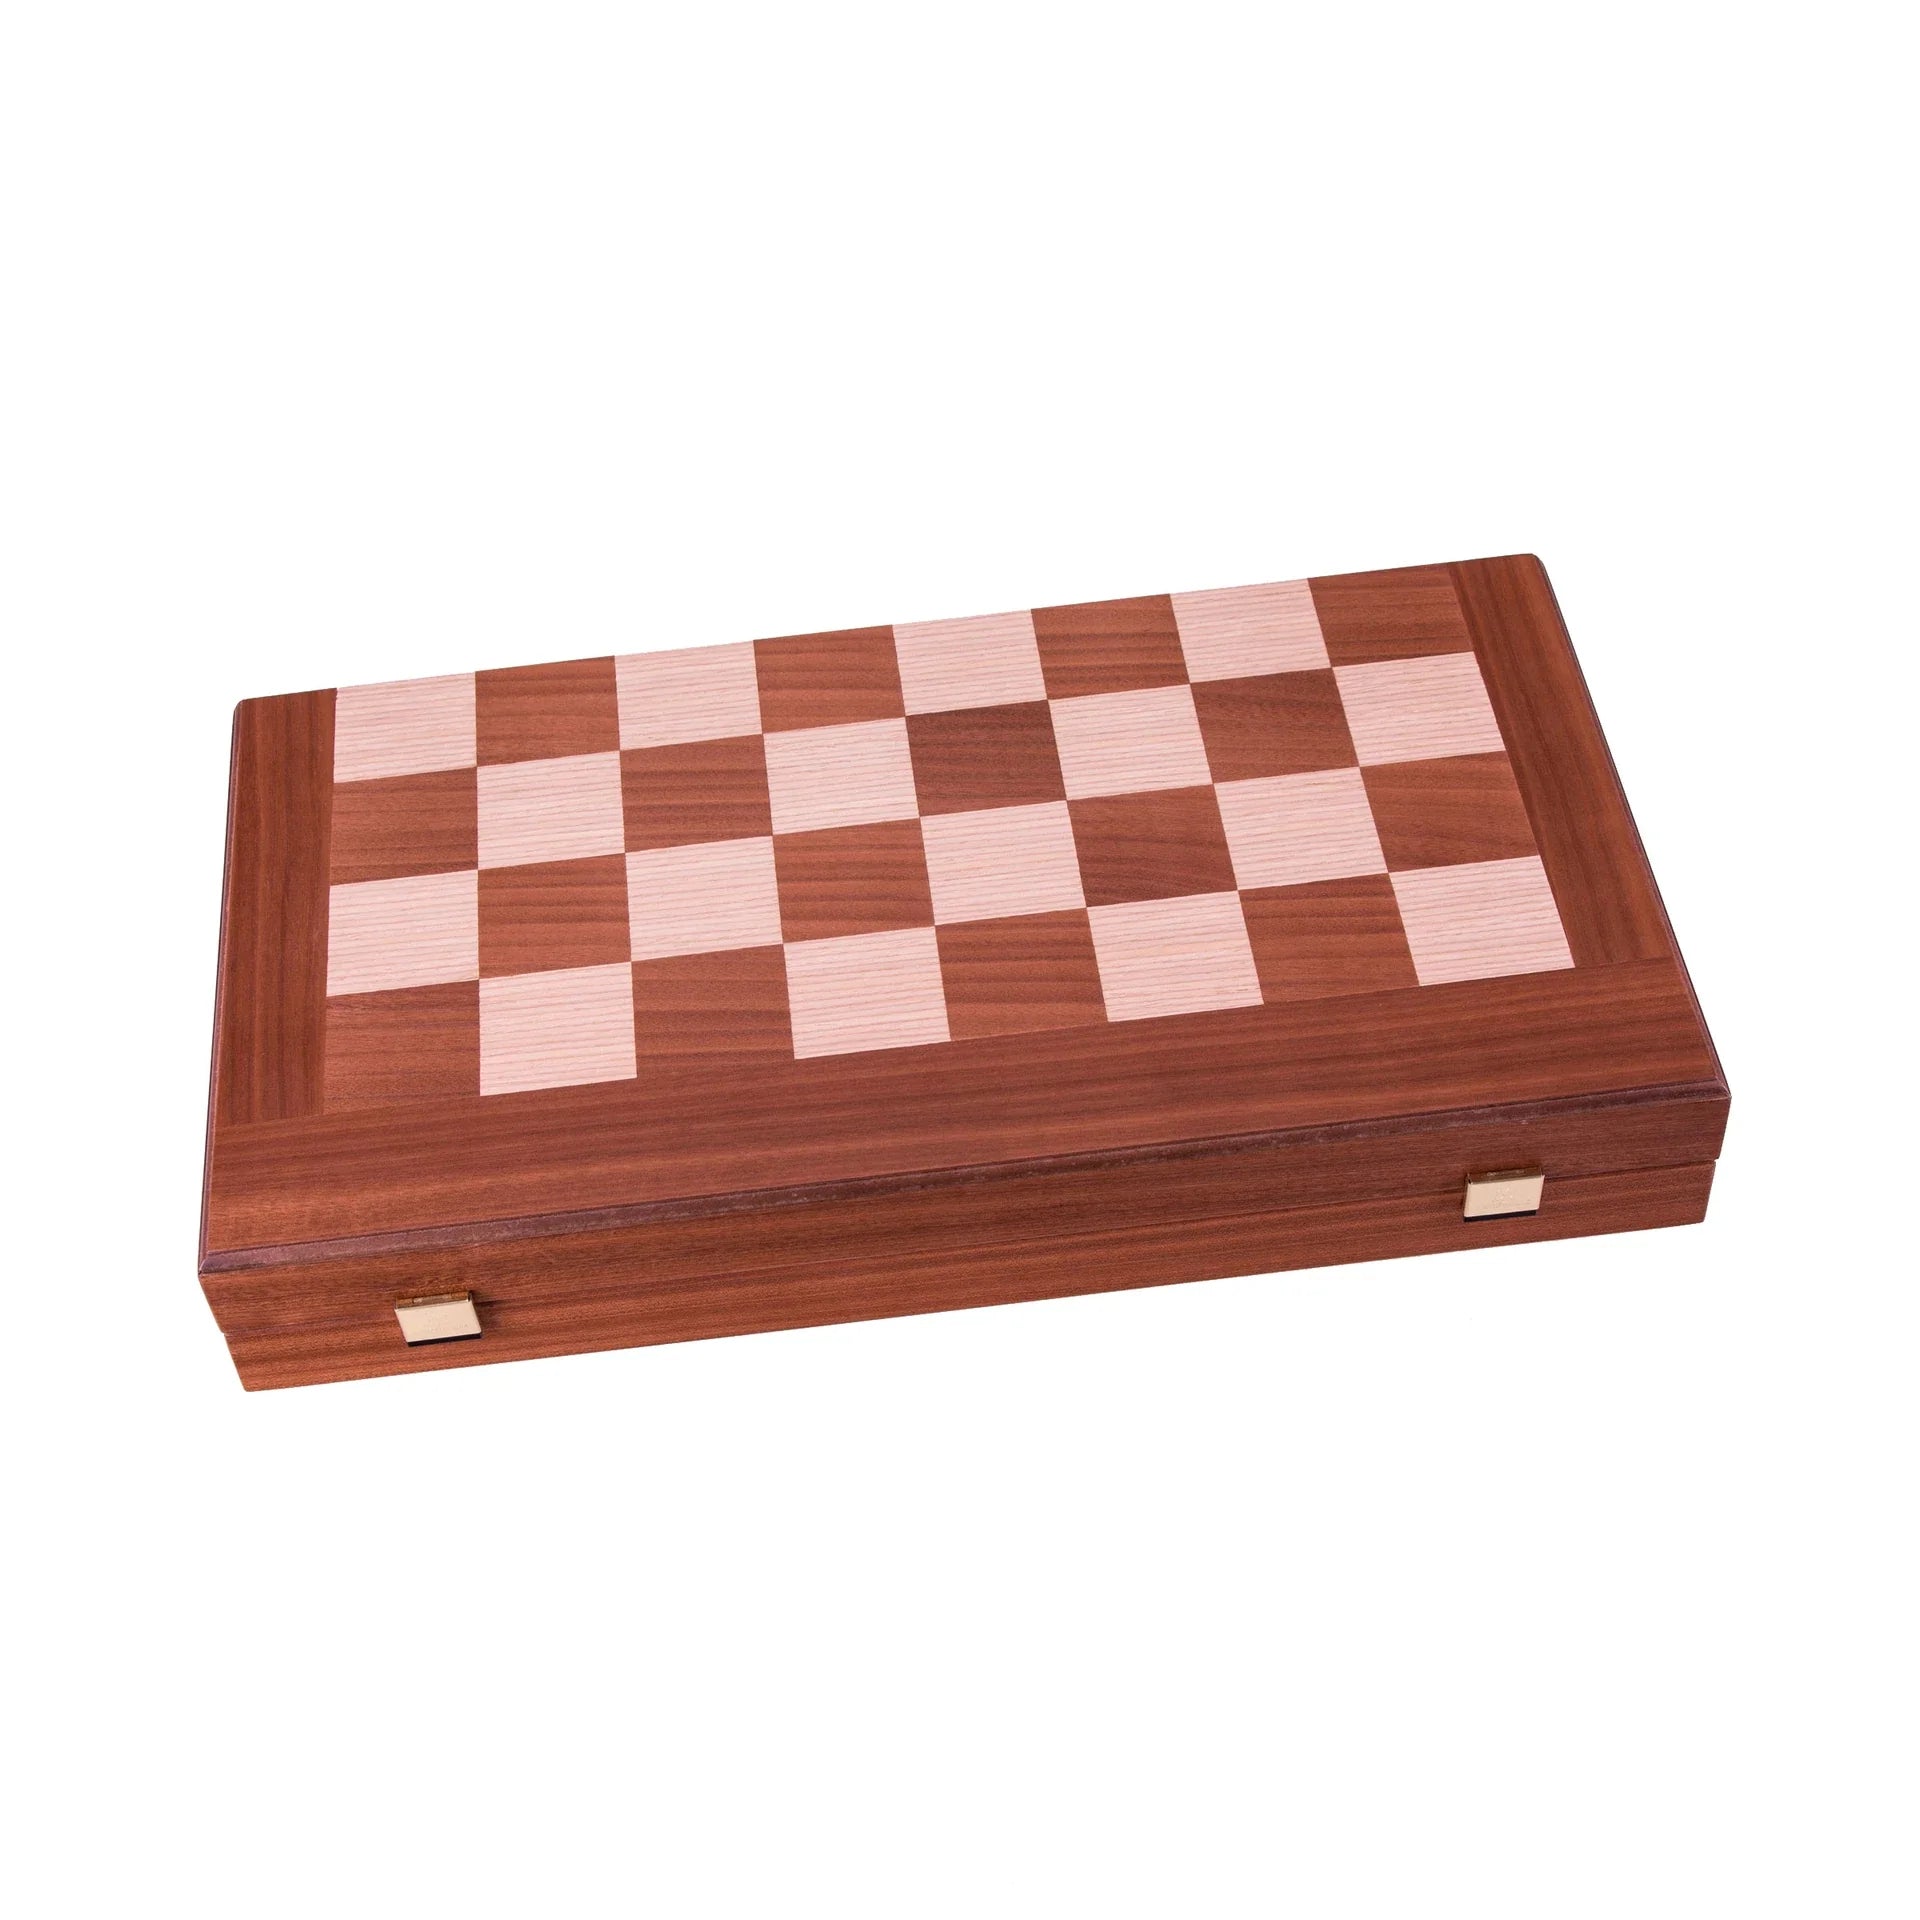 Schach & Backgammon Spiele-Kombo Large Classic Style • MANOPOULOS